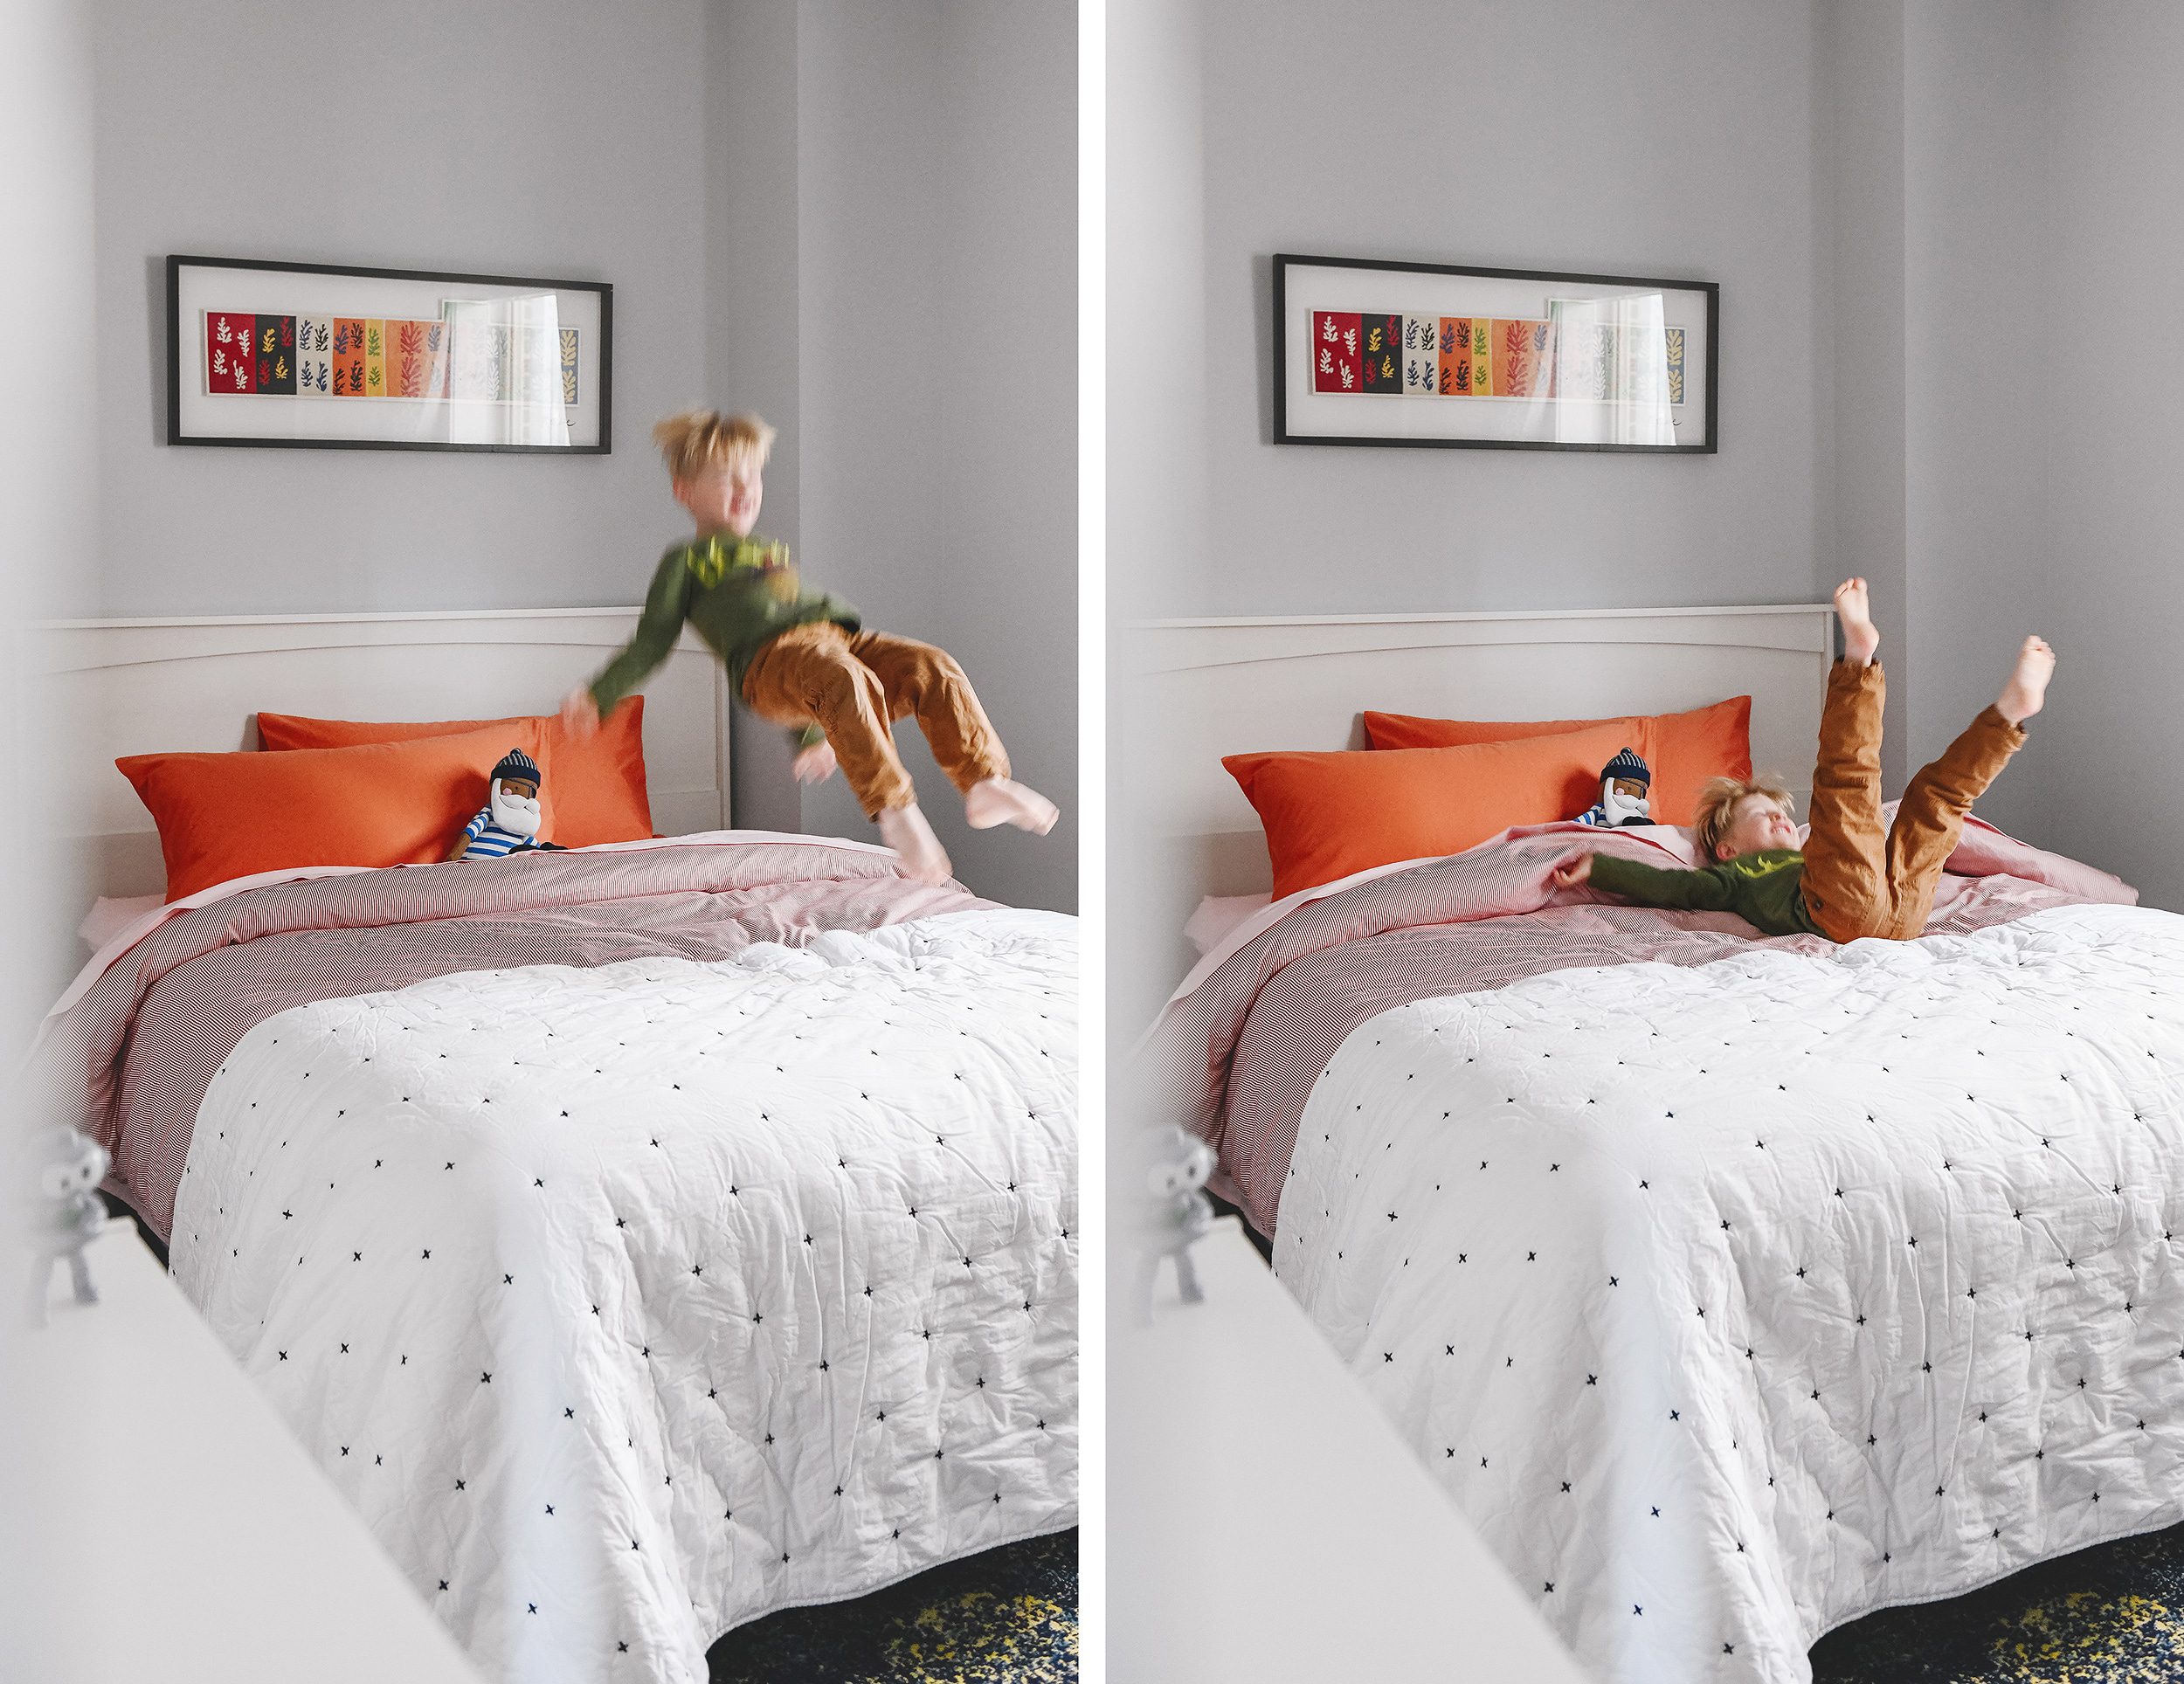 Wallace jumping on the bed, outfitted with Brooklinen bedding | via Yellow Brick Home